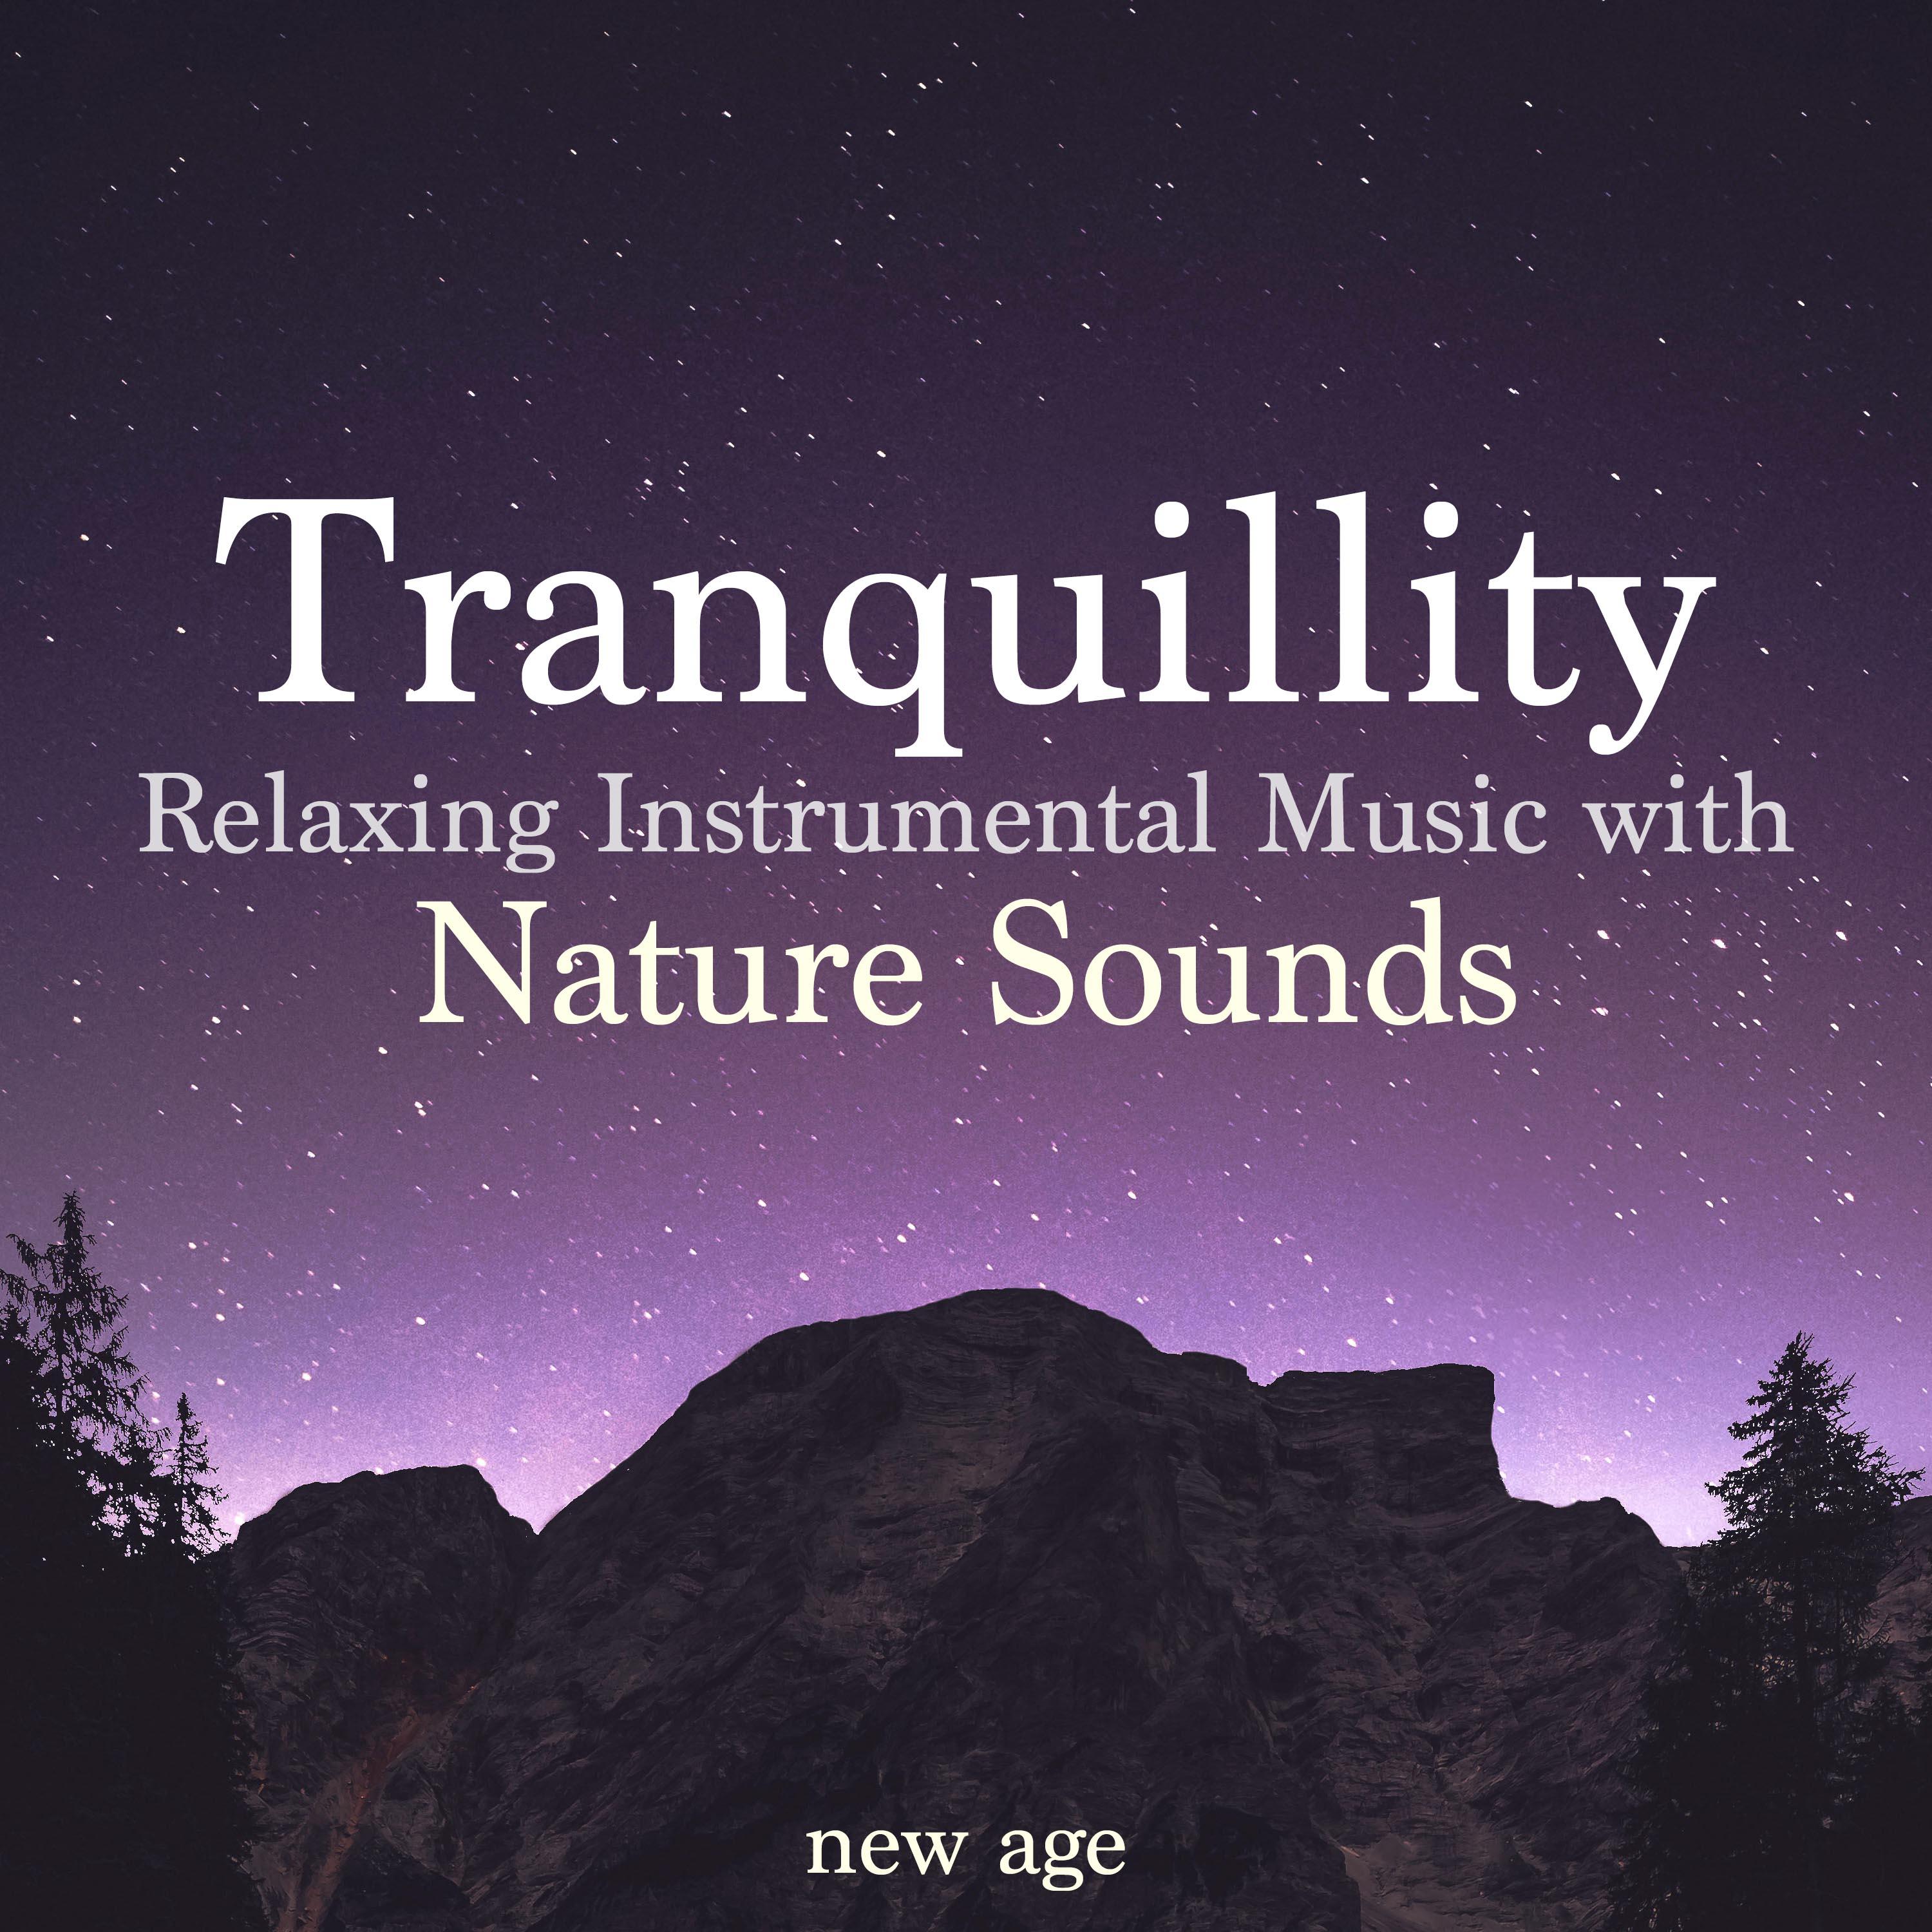 Tranquillity: Relaxing Instrumental Music with Nature Sounds